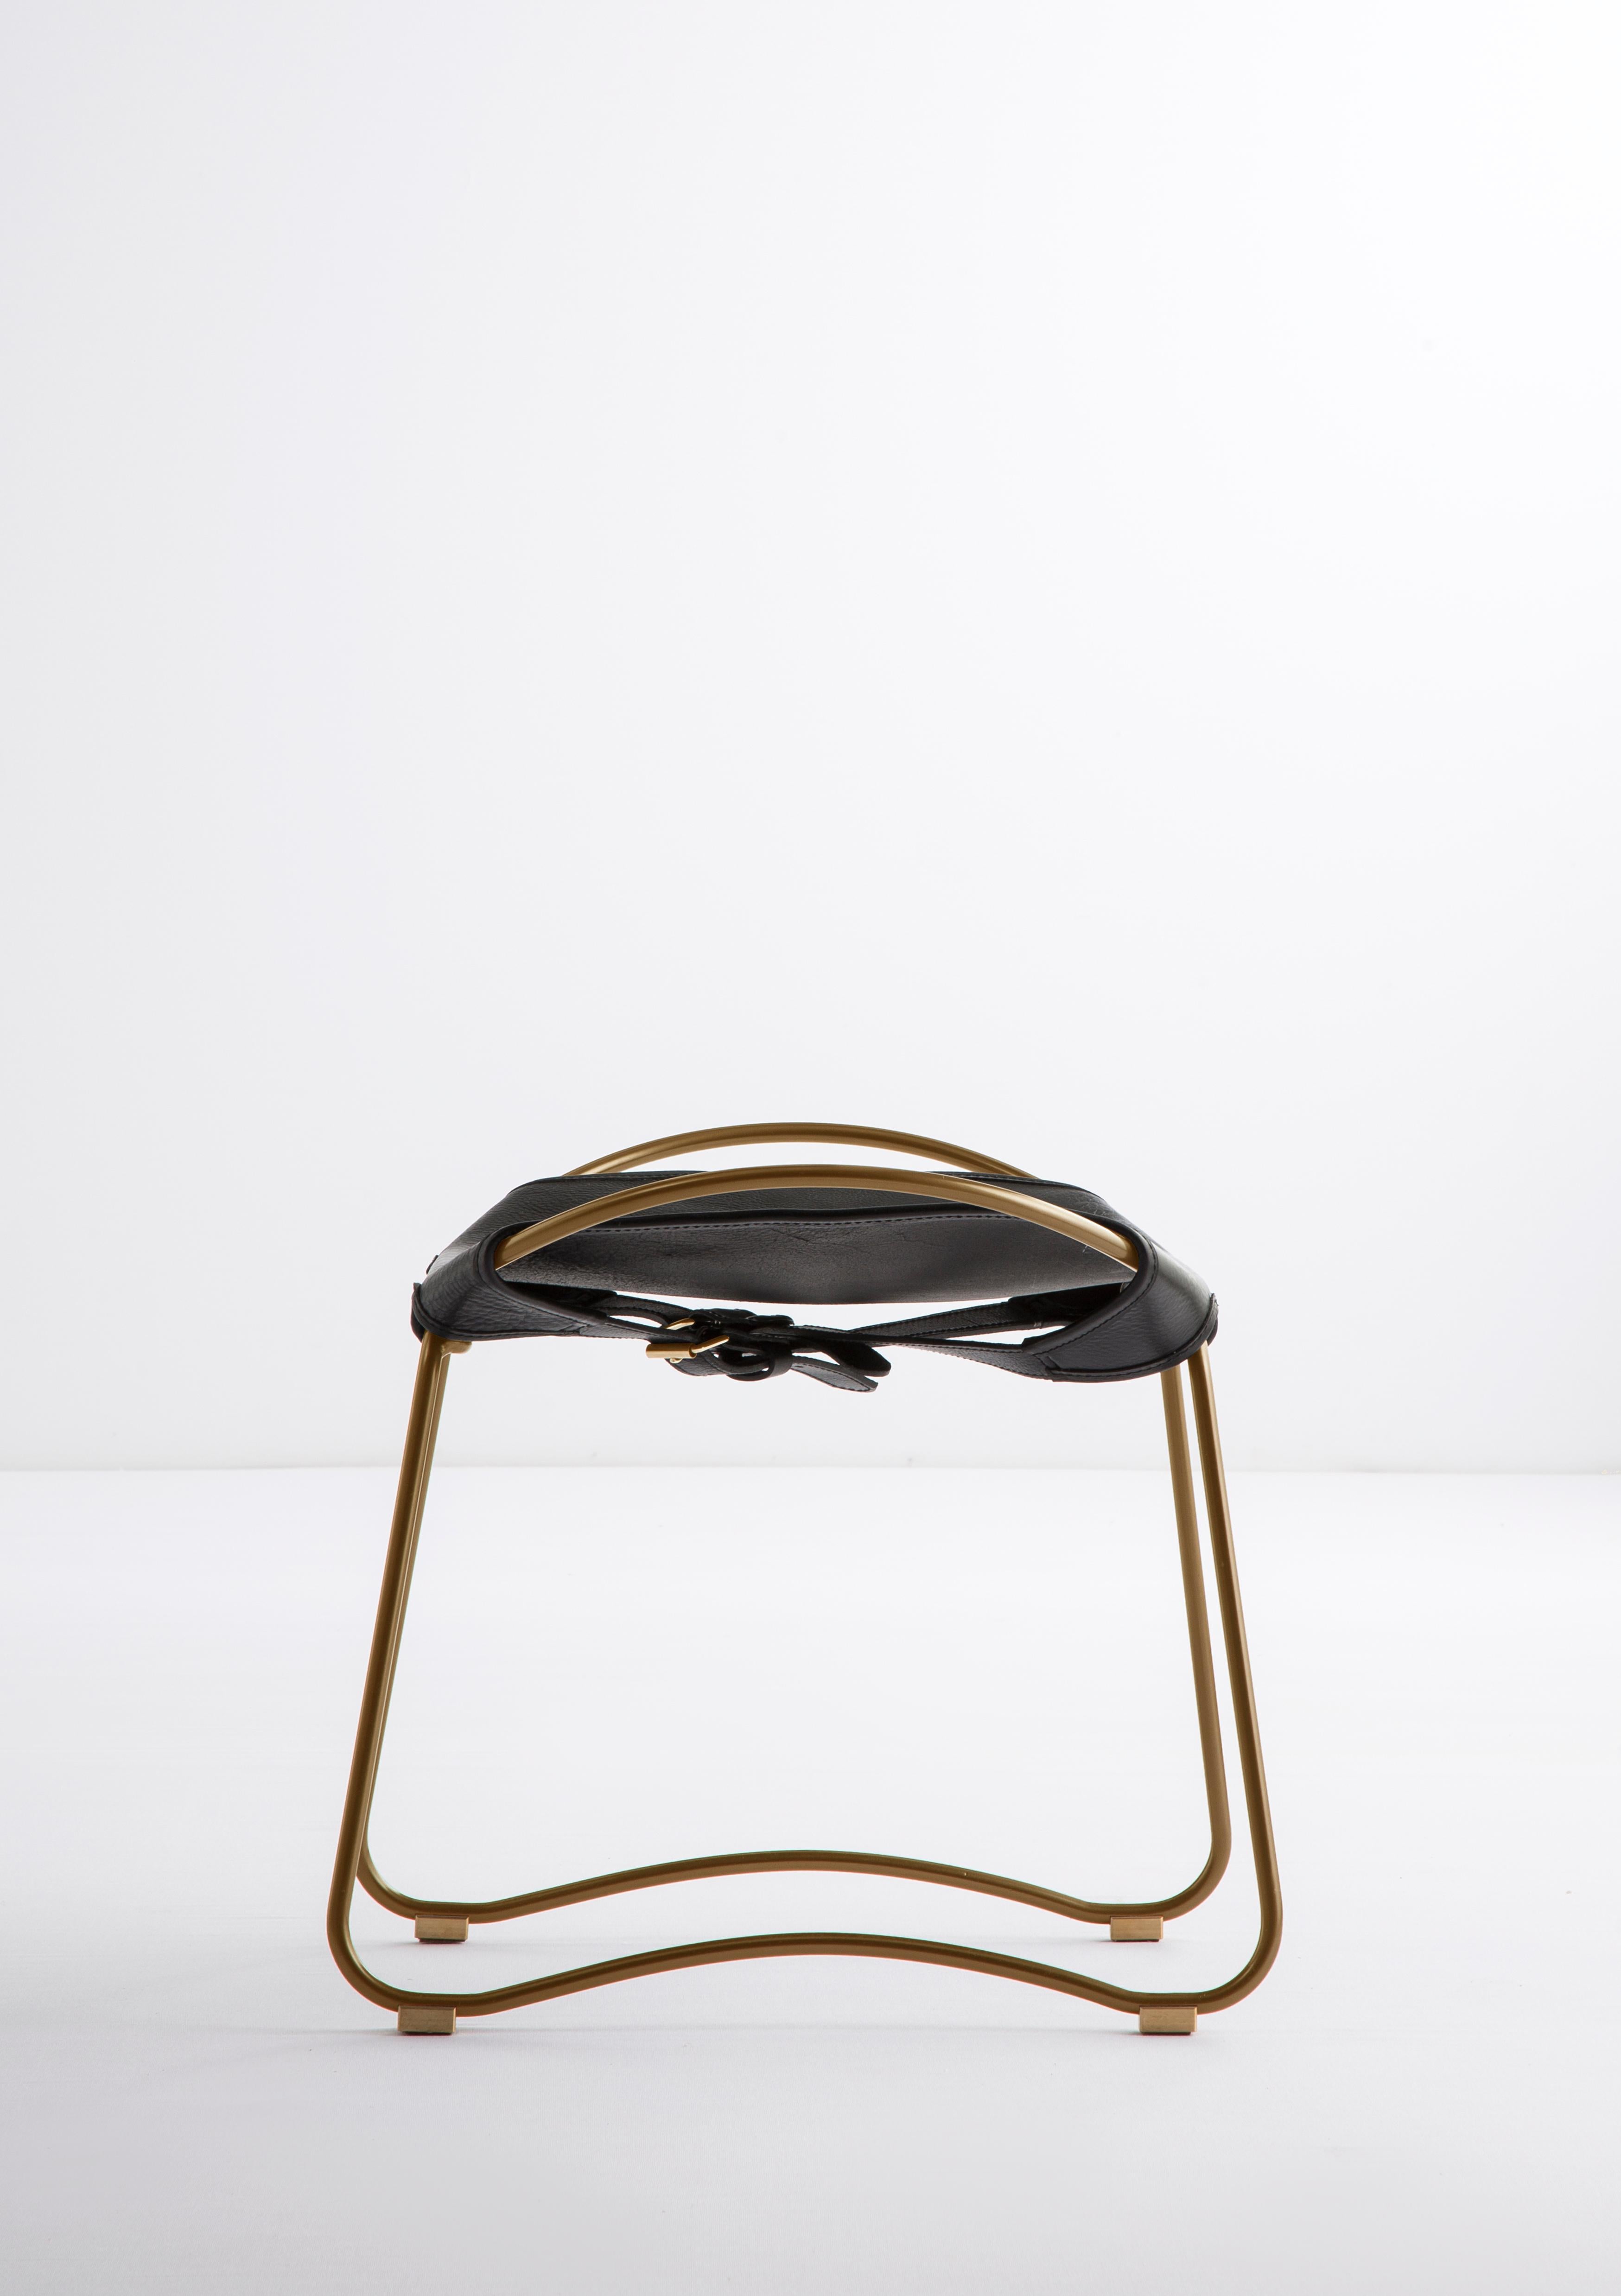 Spanish Footstool, Brass Steel and Black Saddle Leather, Modern Style, Hug Collection For Sale